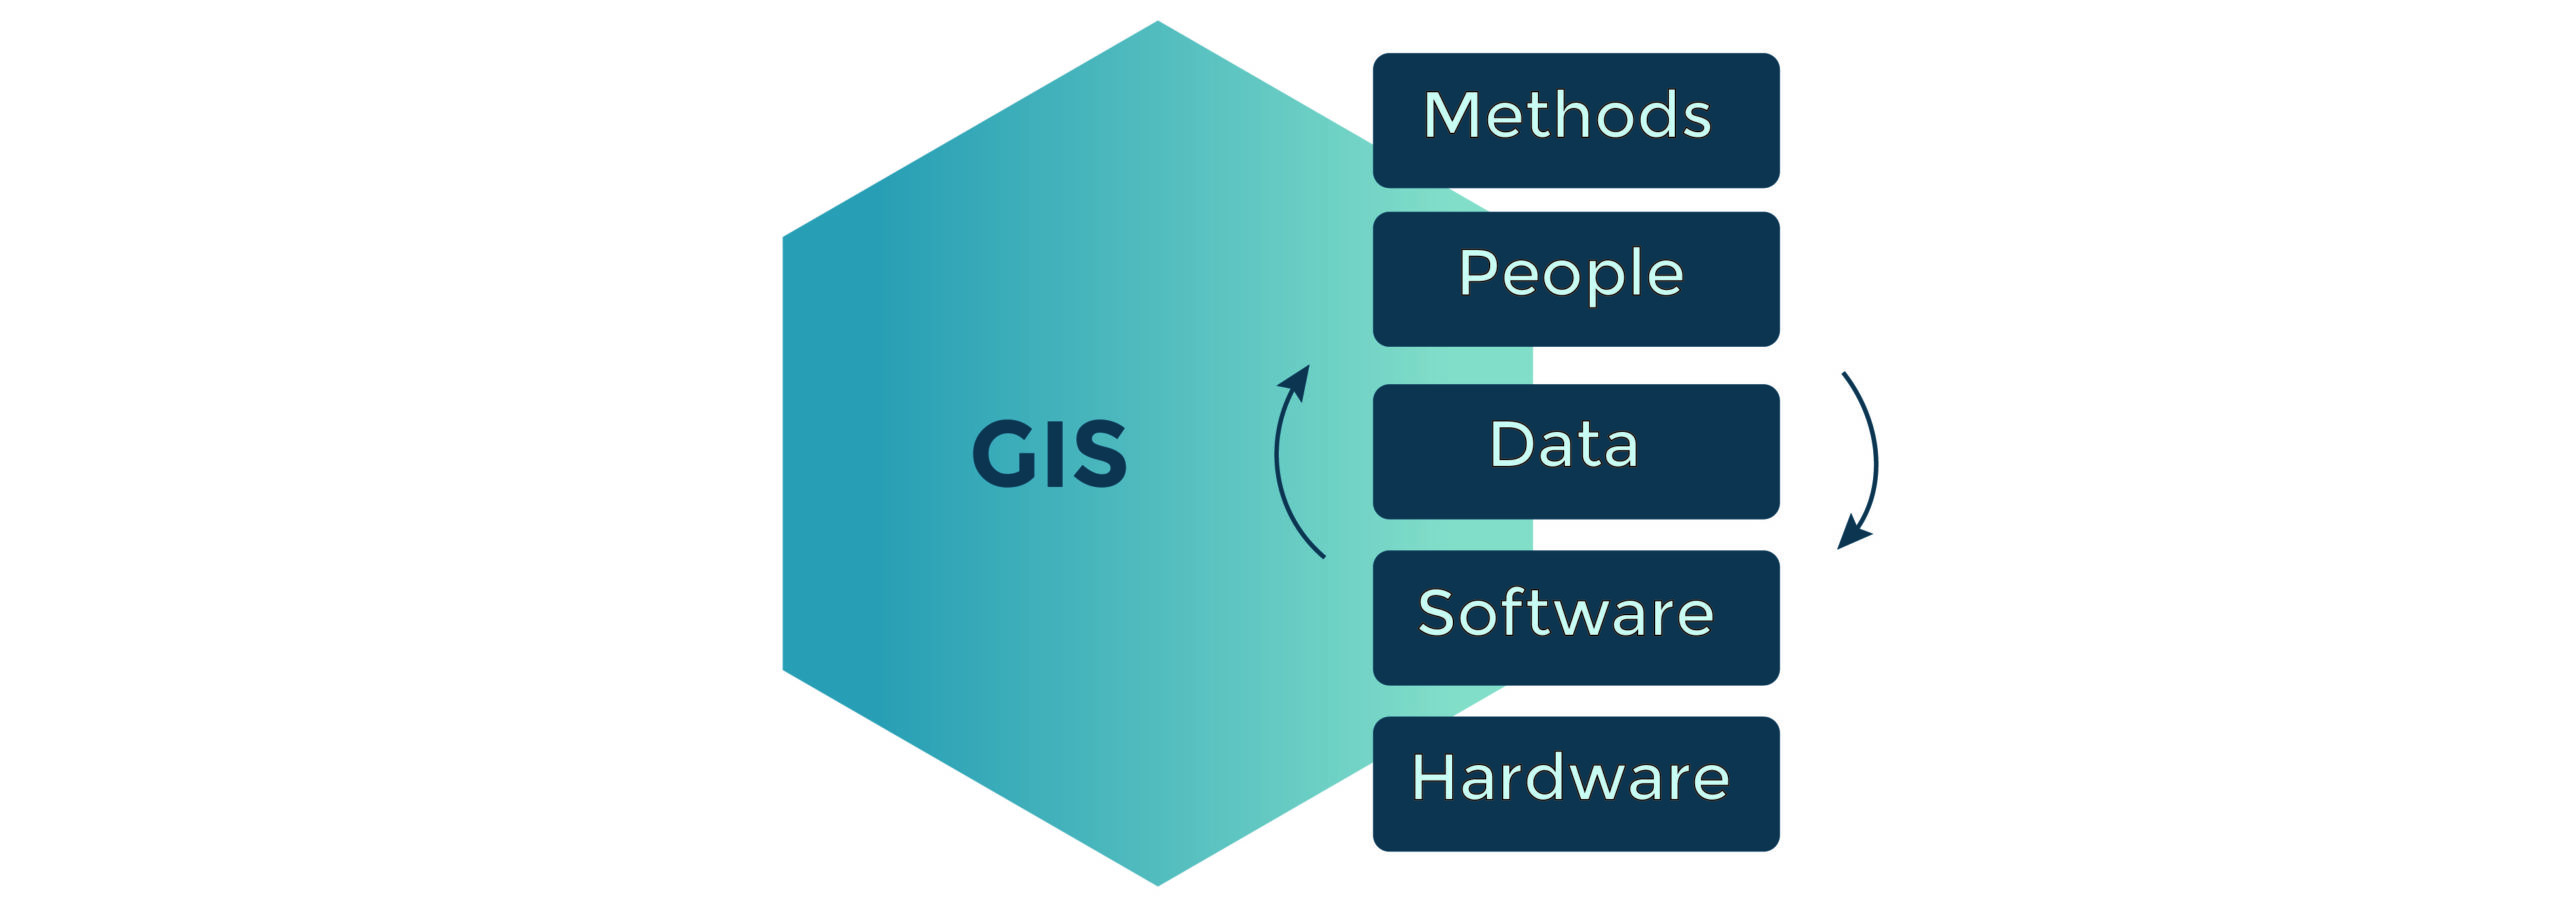 GIS for spatial analysis